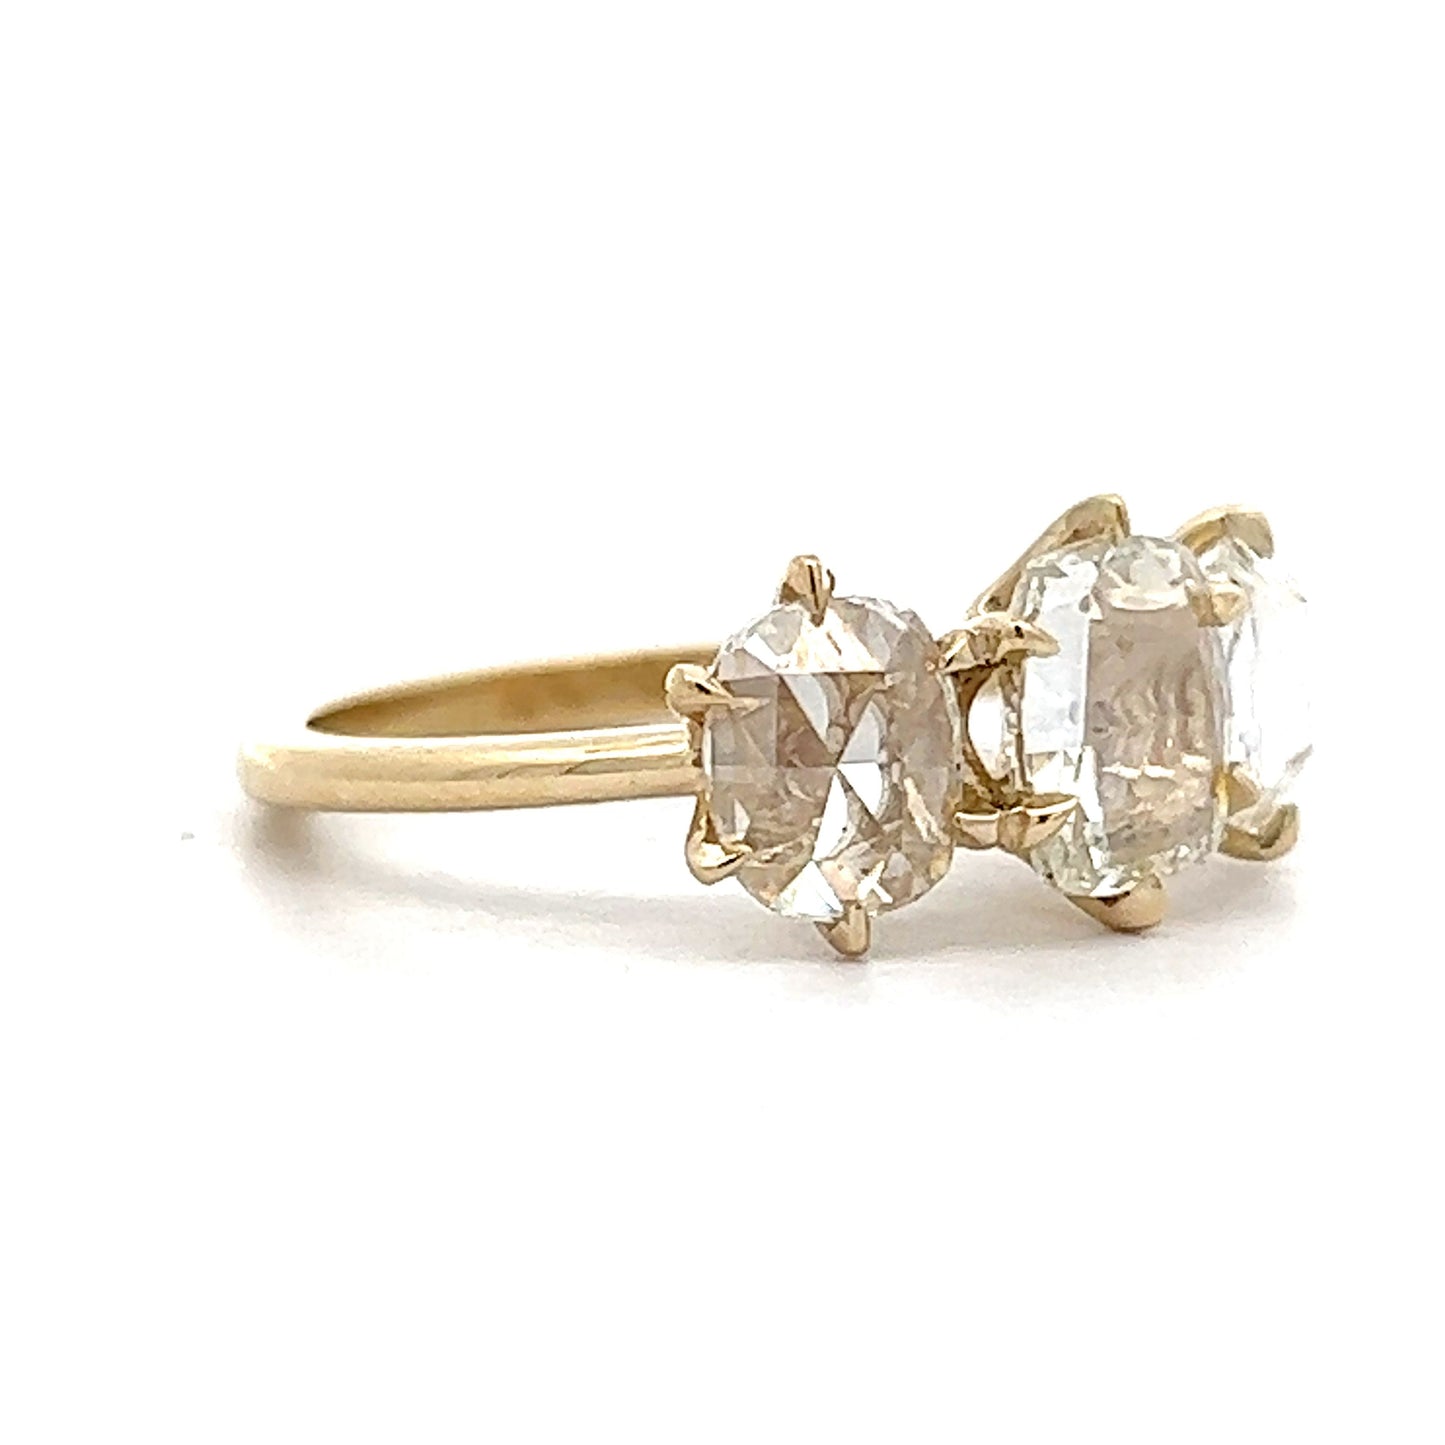 1.76 Rose Cut Diamond Engagement Ring in Yellow Gold